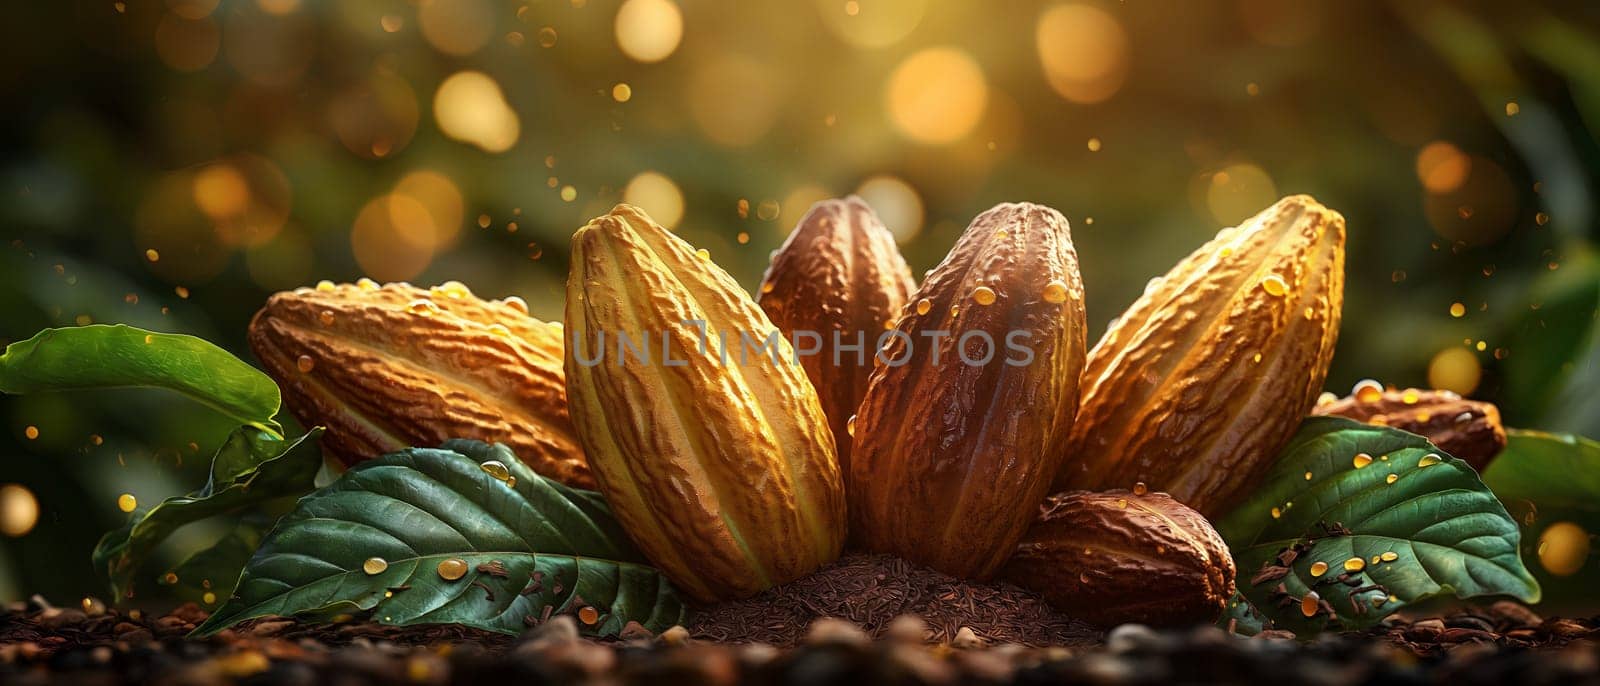 Abstract background with cocoa beans with leaves. by Fischeron